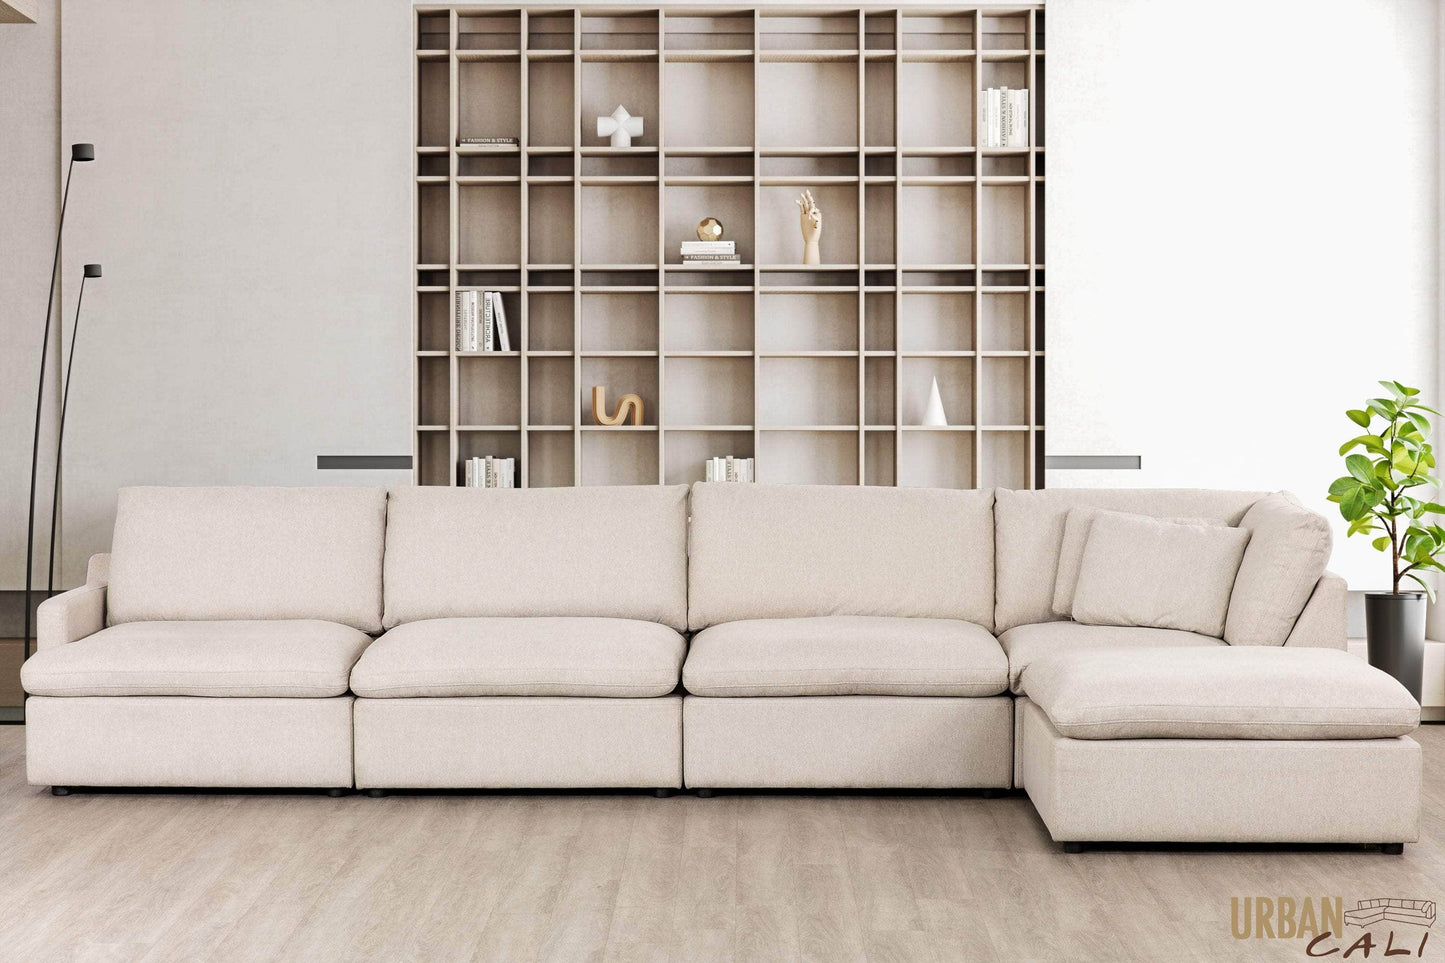 Pending - Urban Cali Right Facing Chaise Long Beach Modular L-Shaped Sectional Sofa with Ottoman in Axel Beige